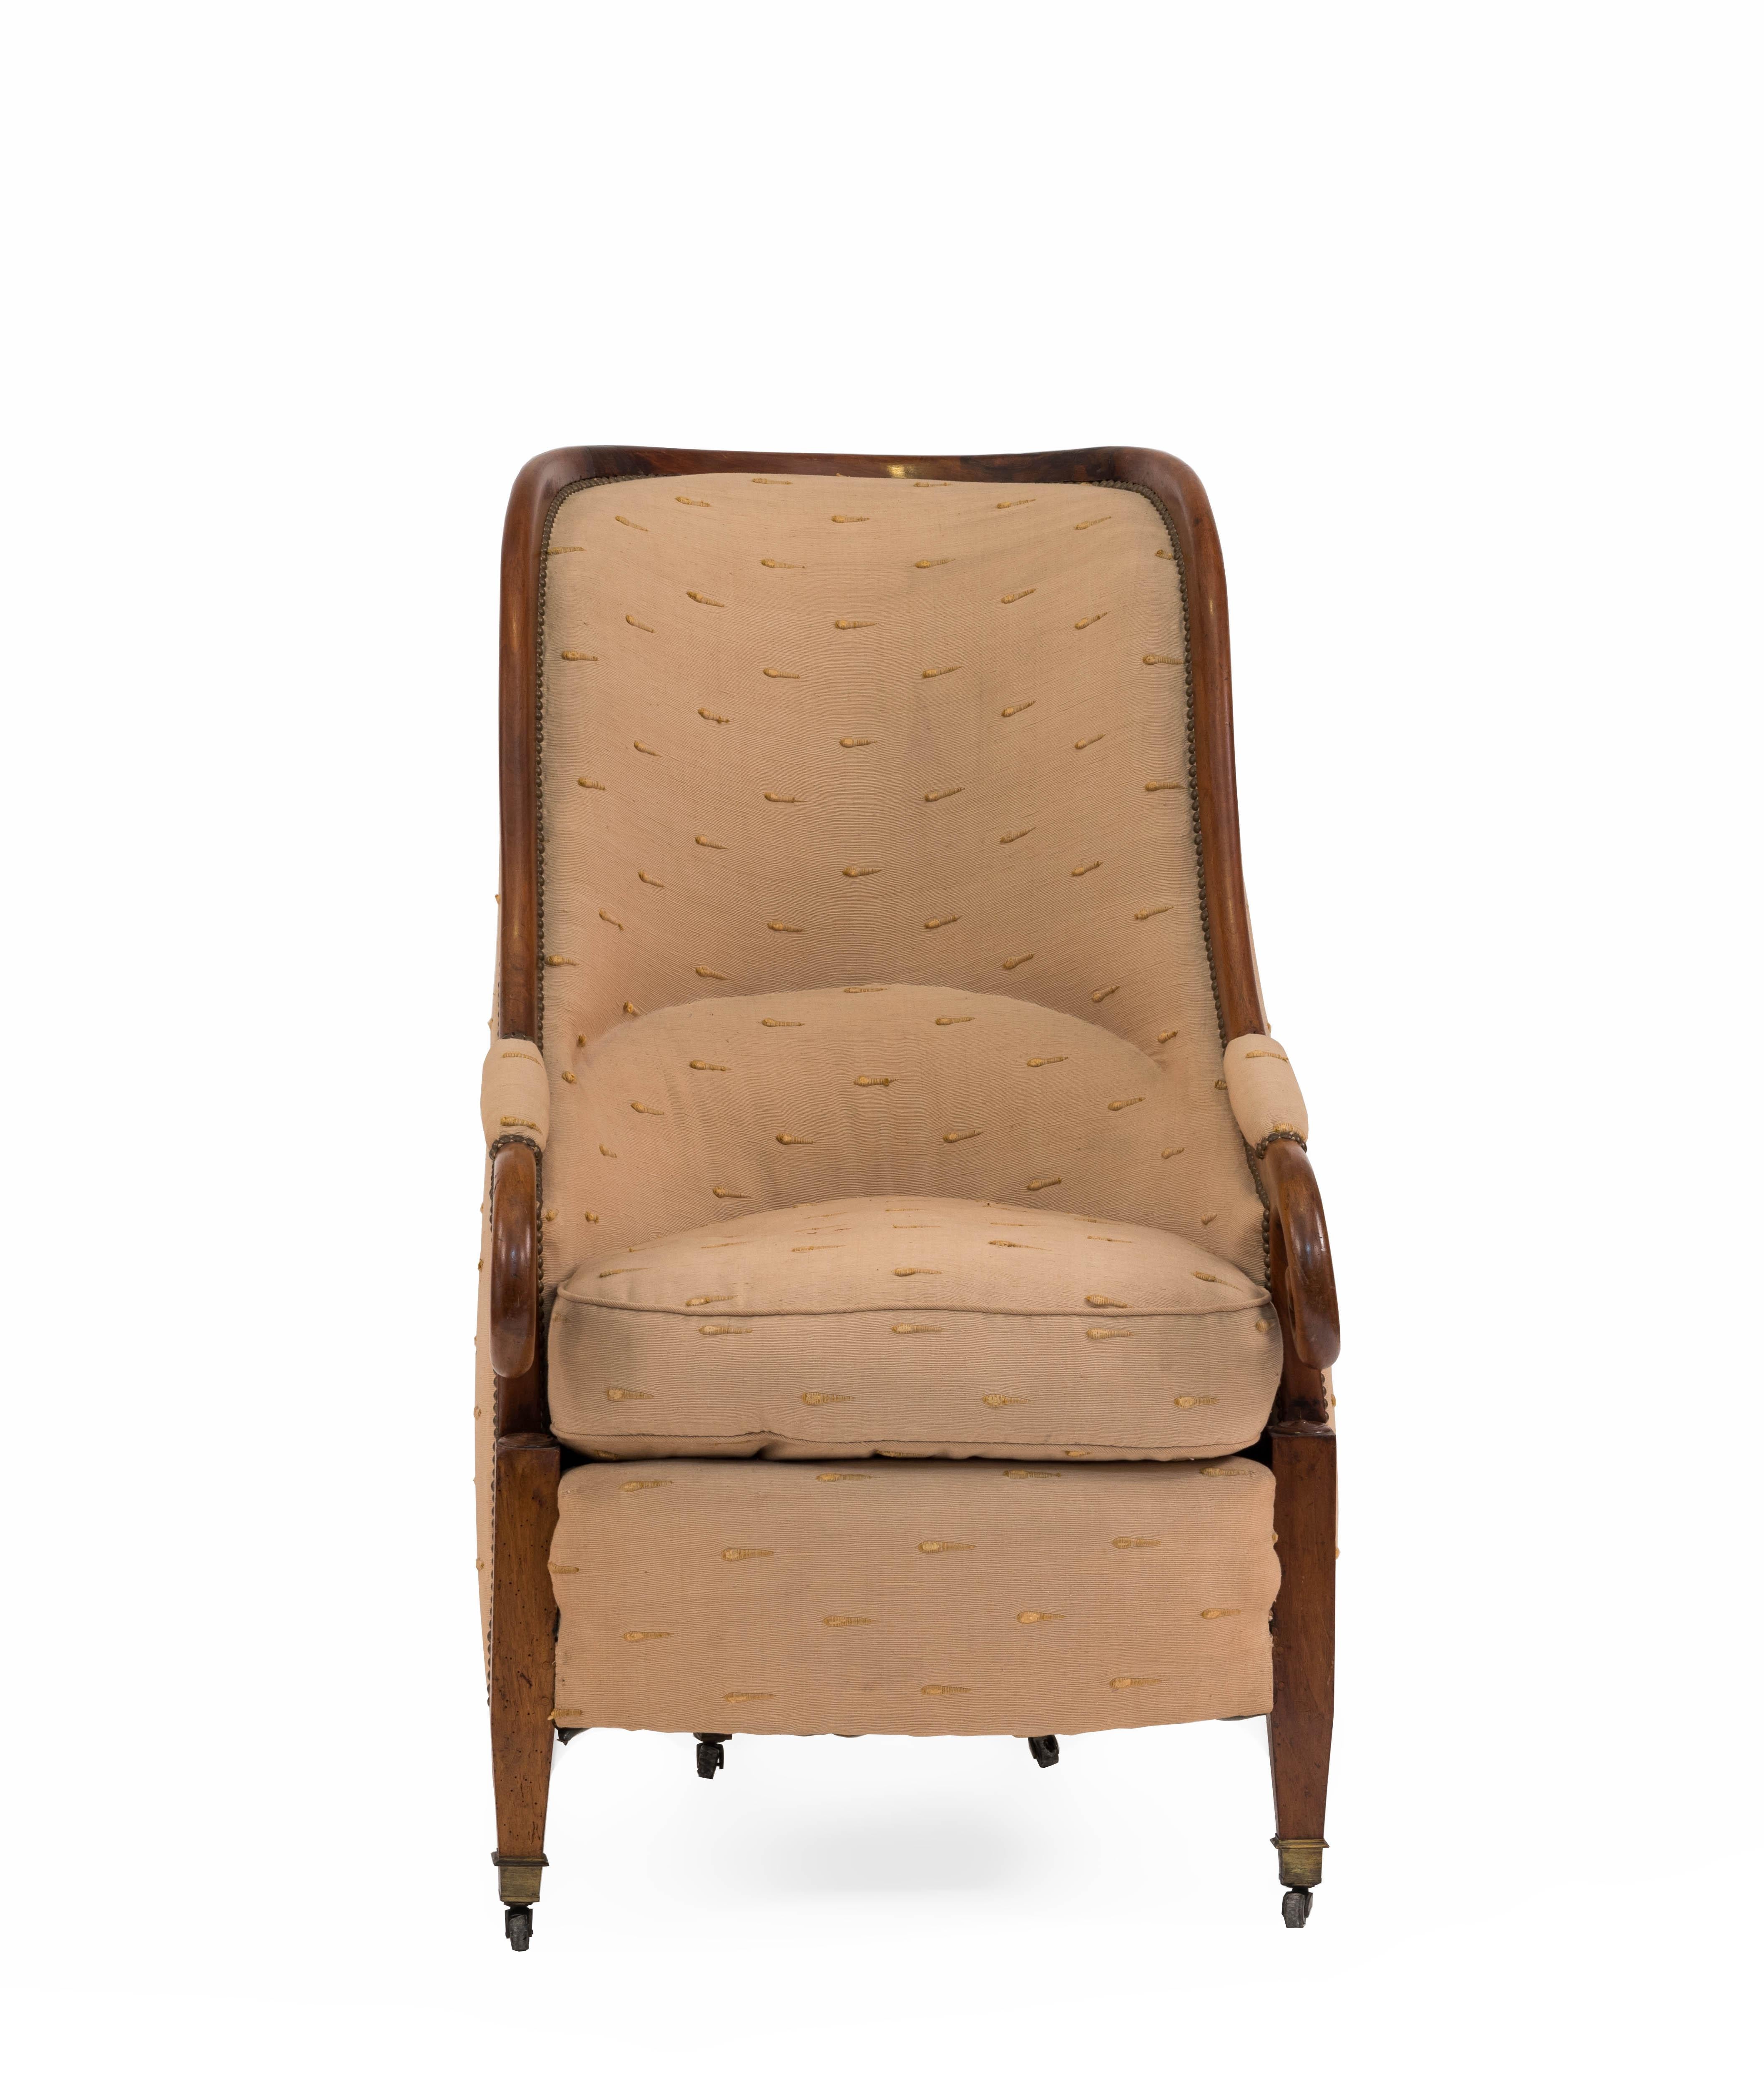 English Regency-style (19th Century) walnut club chair with scroll arms and rounded high back.
